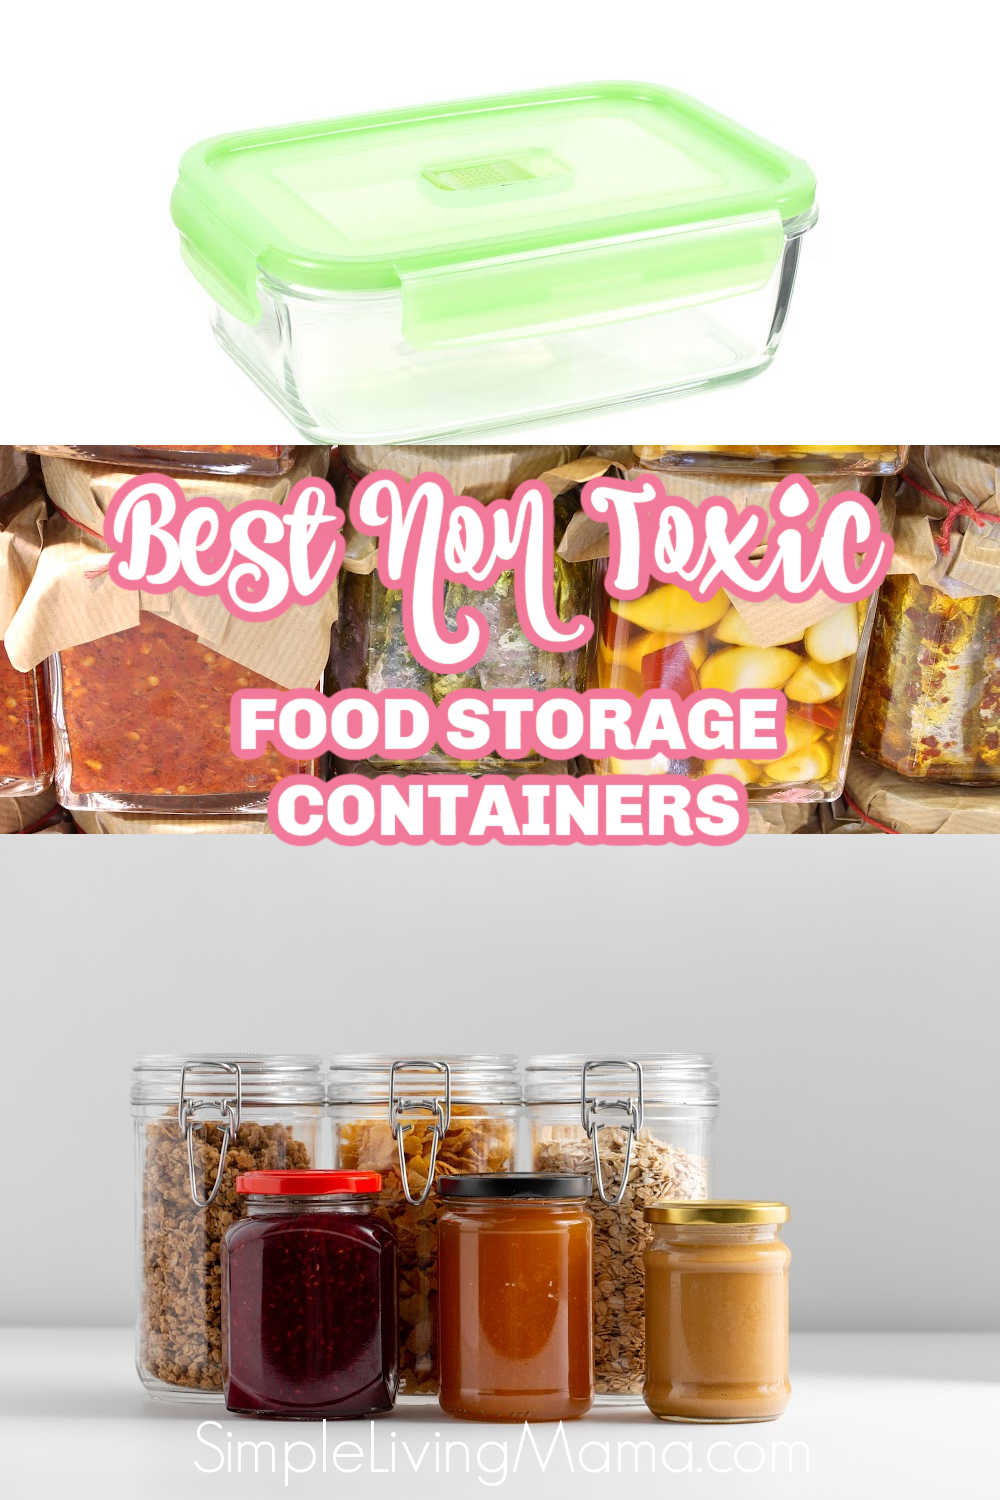 https://simplelivingmama.com/wp-content/uploads/2023/02/best-non-toxic-food-storage-containers.jpg